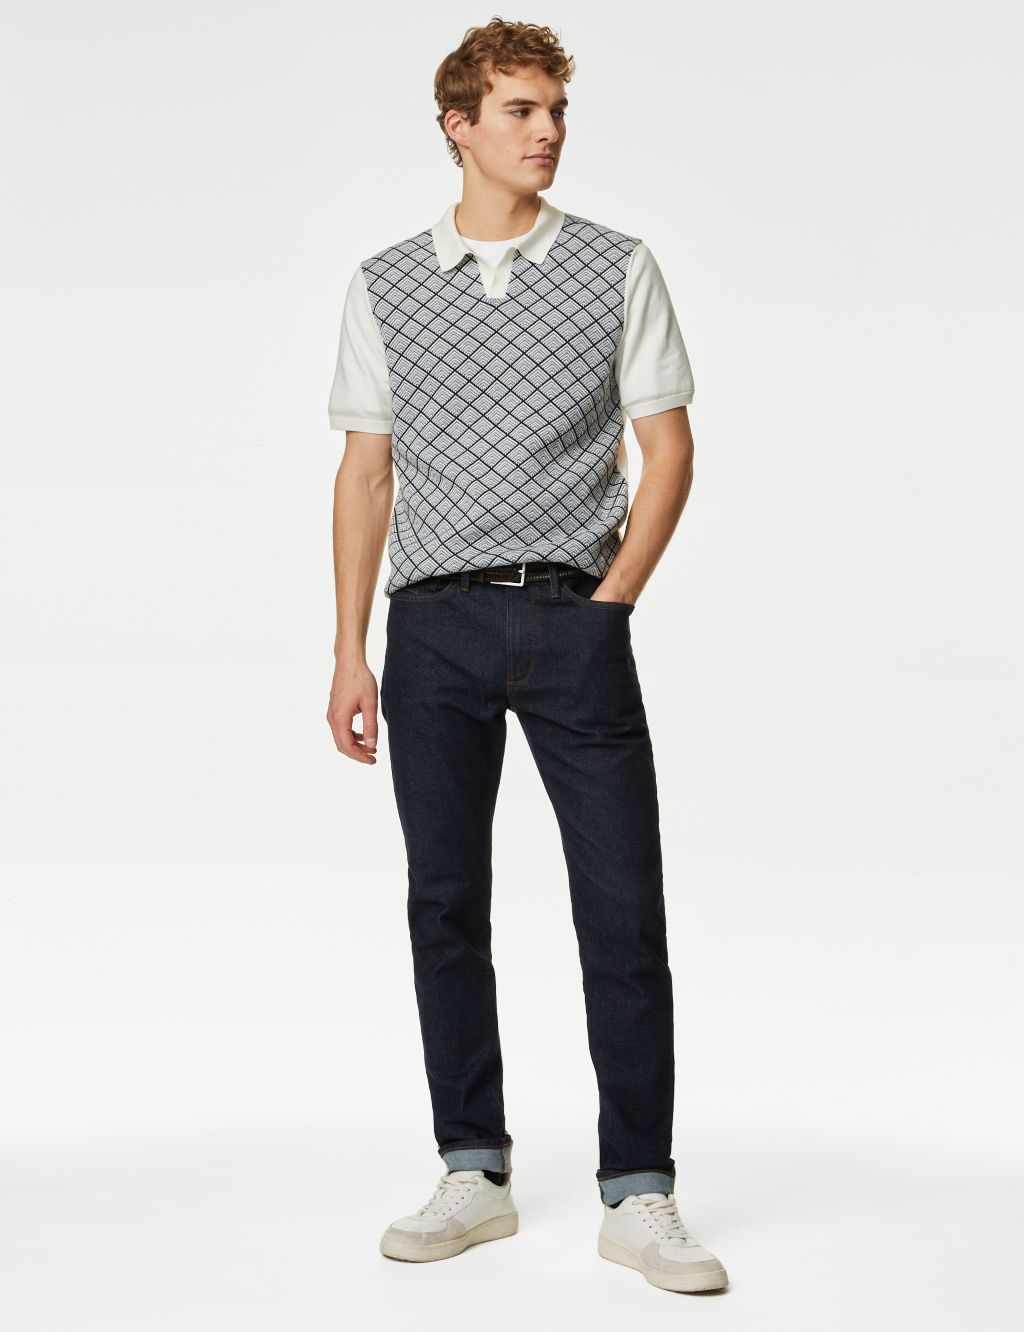 Cotton Rich Geometric Knitted Polo Shirt image 1